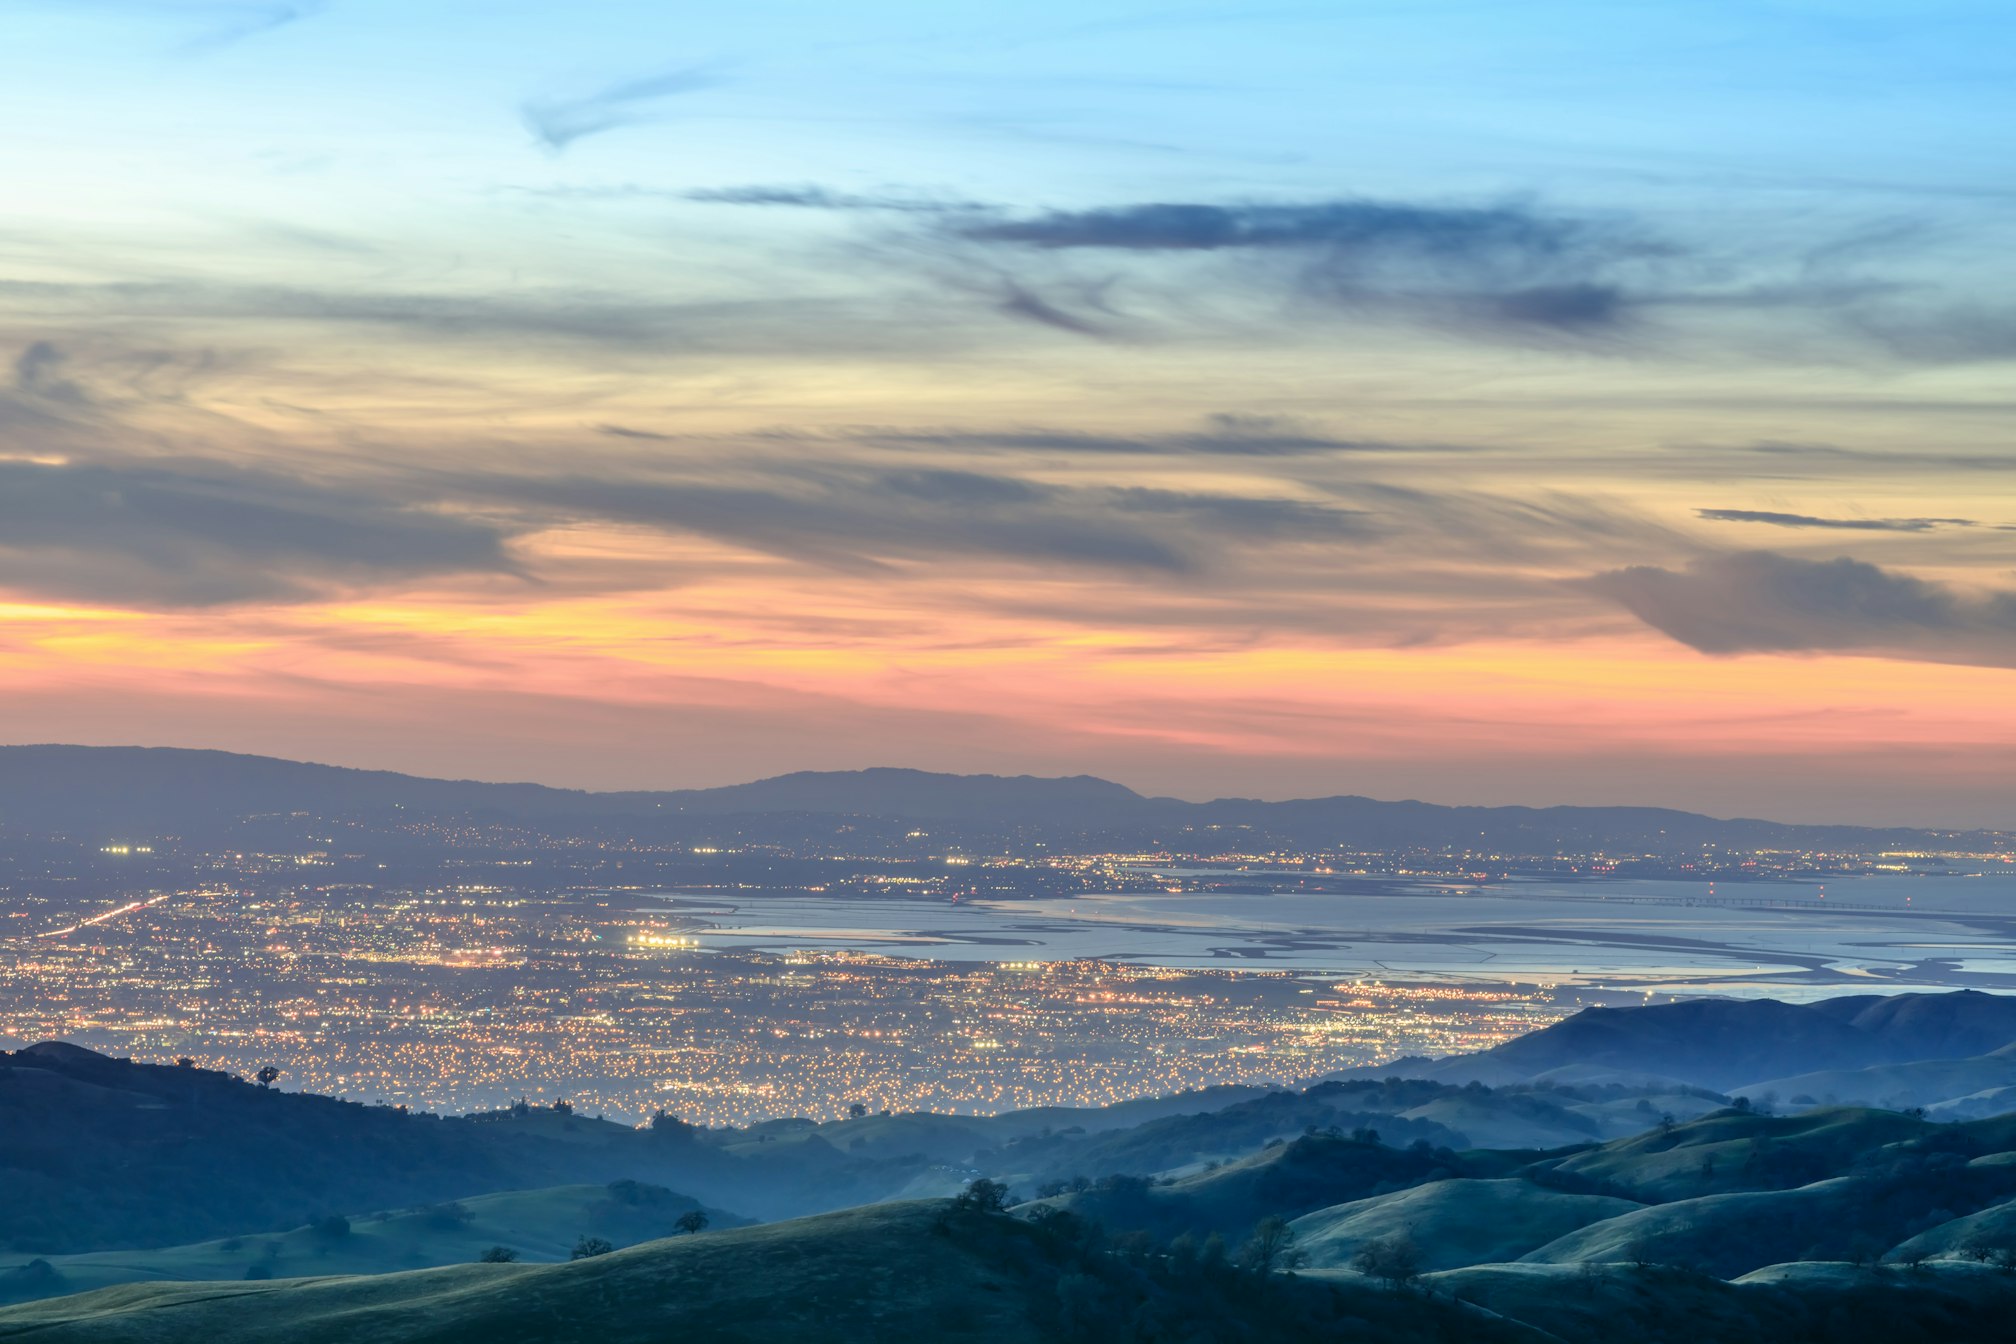 Silicon Valley Views from above. Santa Clara Valley at dusk as seen from Lick Observatory in Mount Hamilton east of San Jose